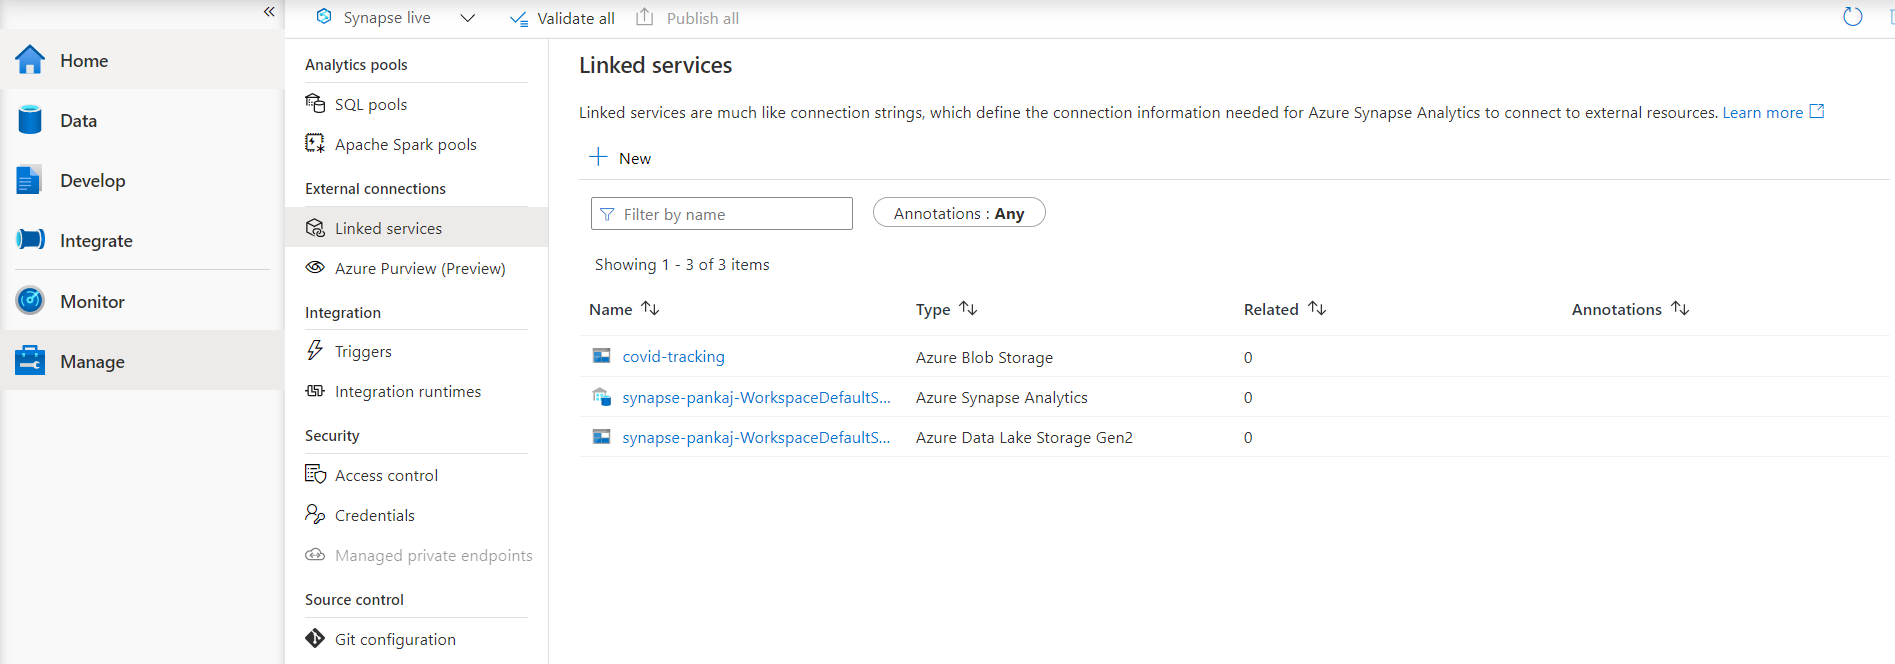 Manage Hub to see existing Linked services